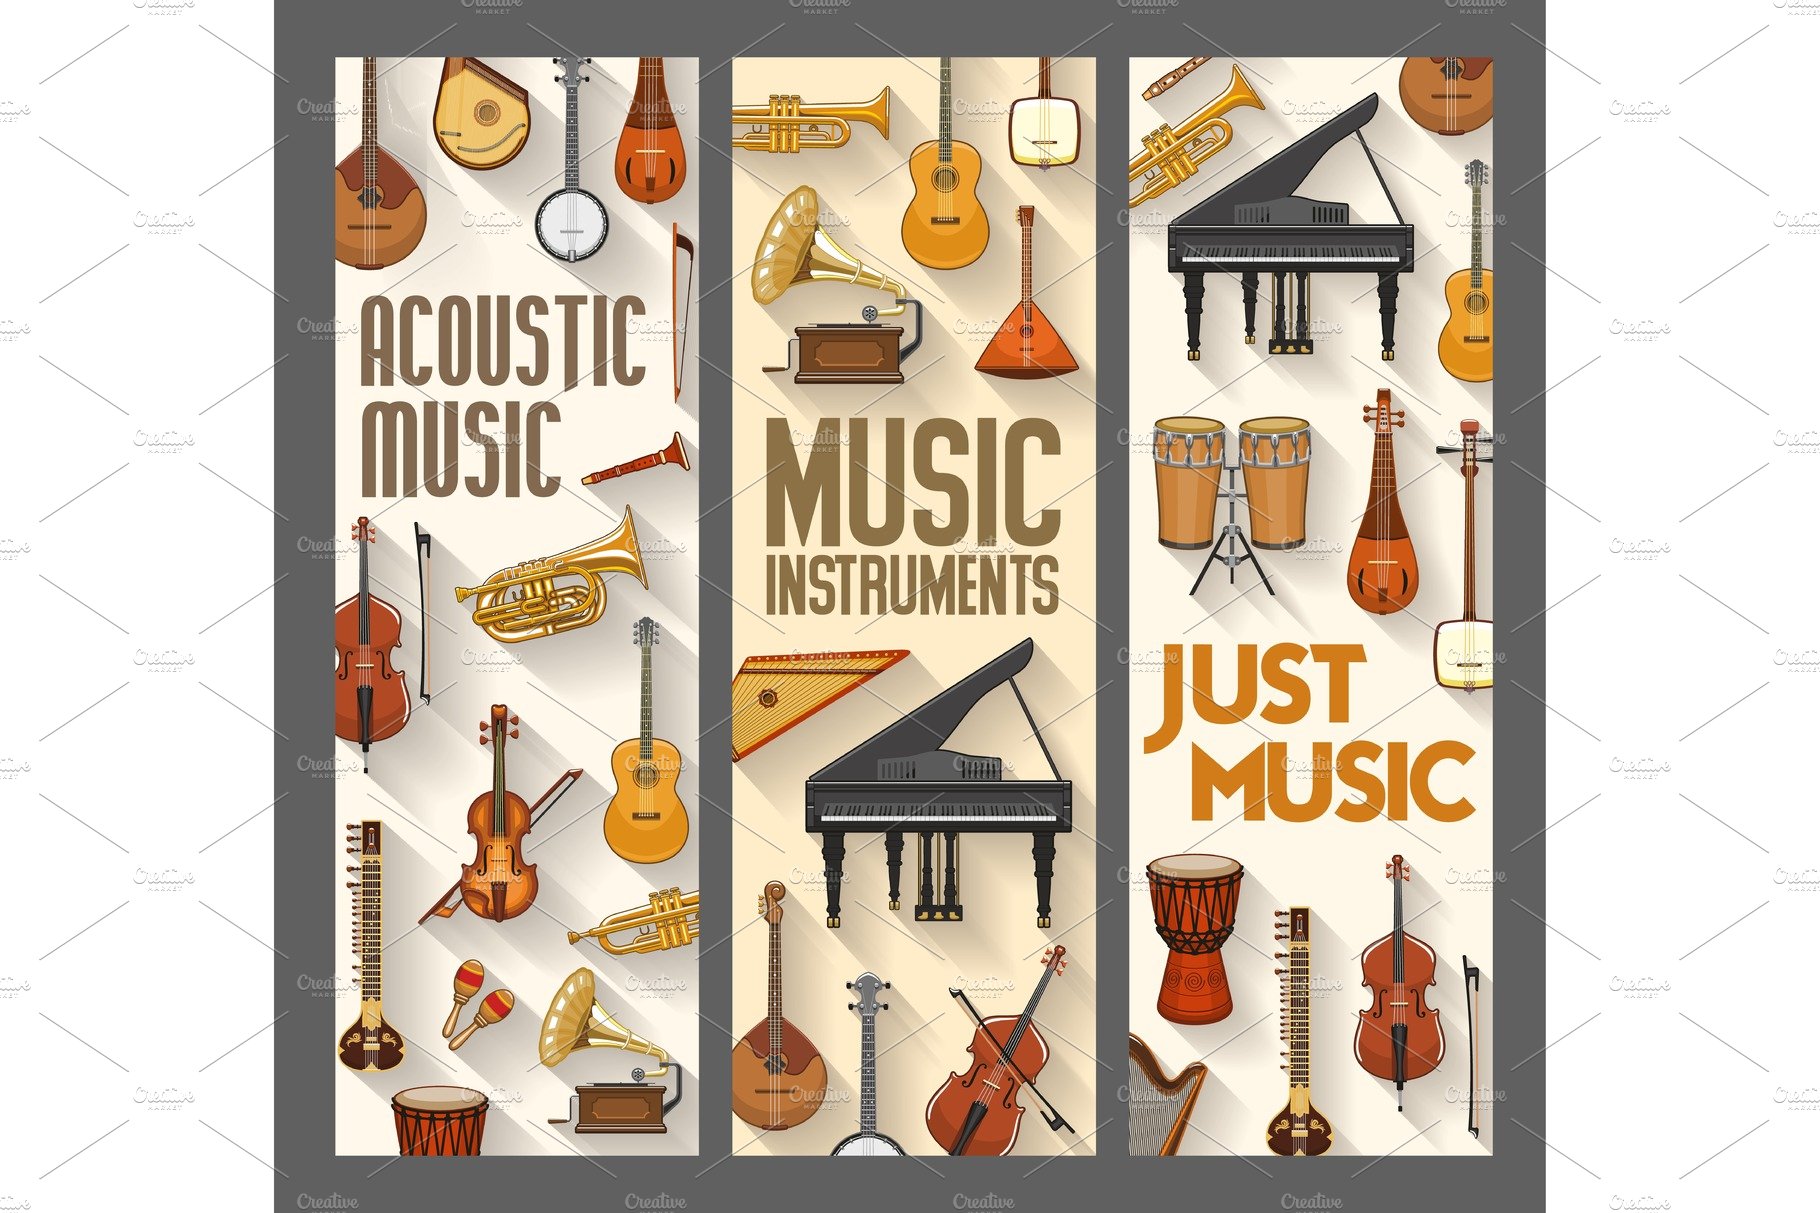 Music orchestra instruments cover image.